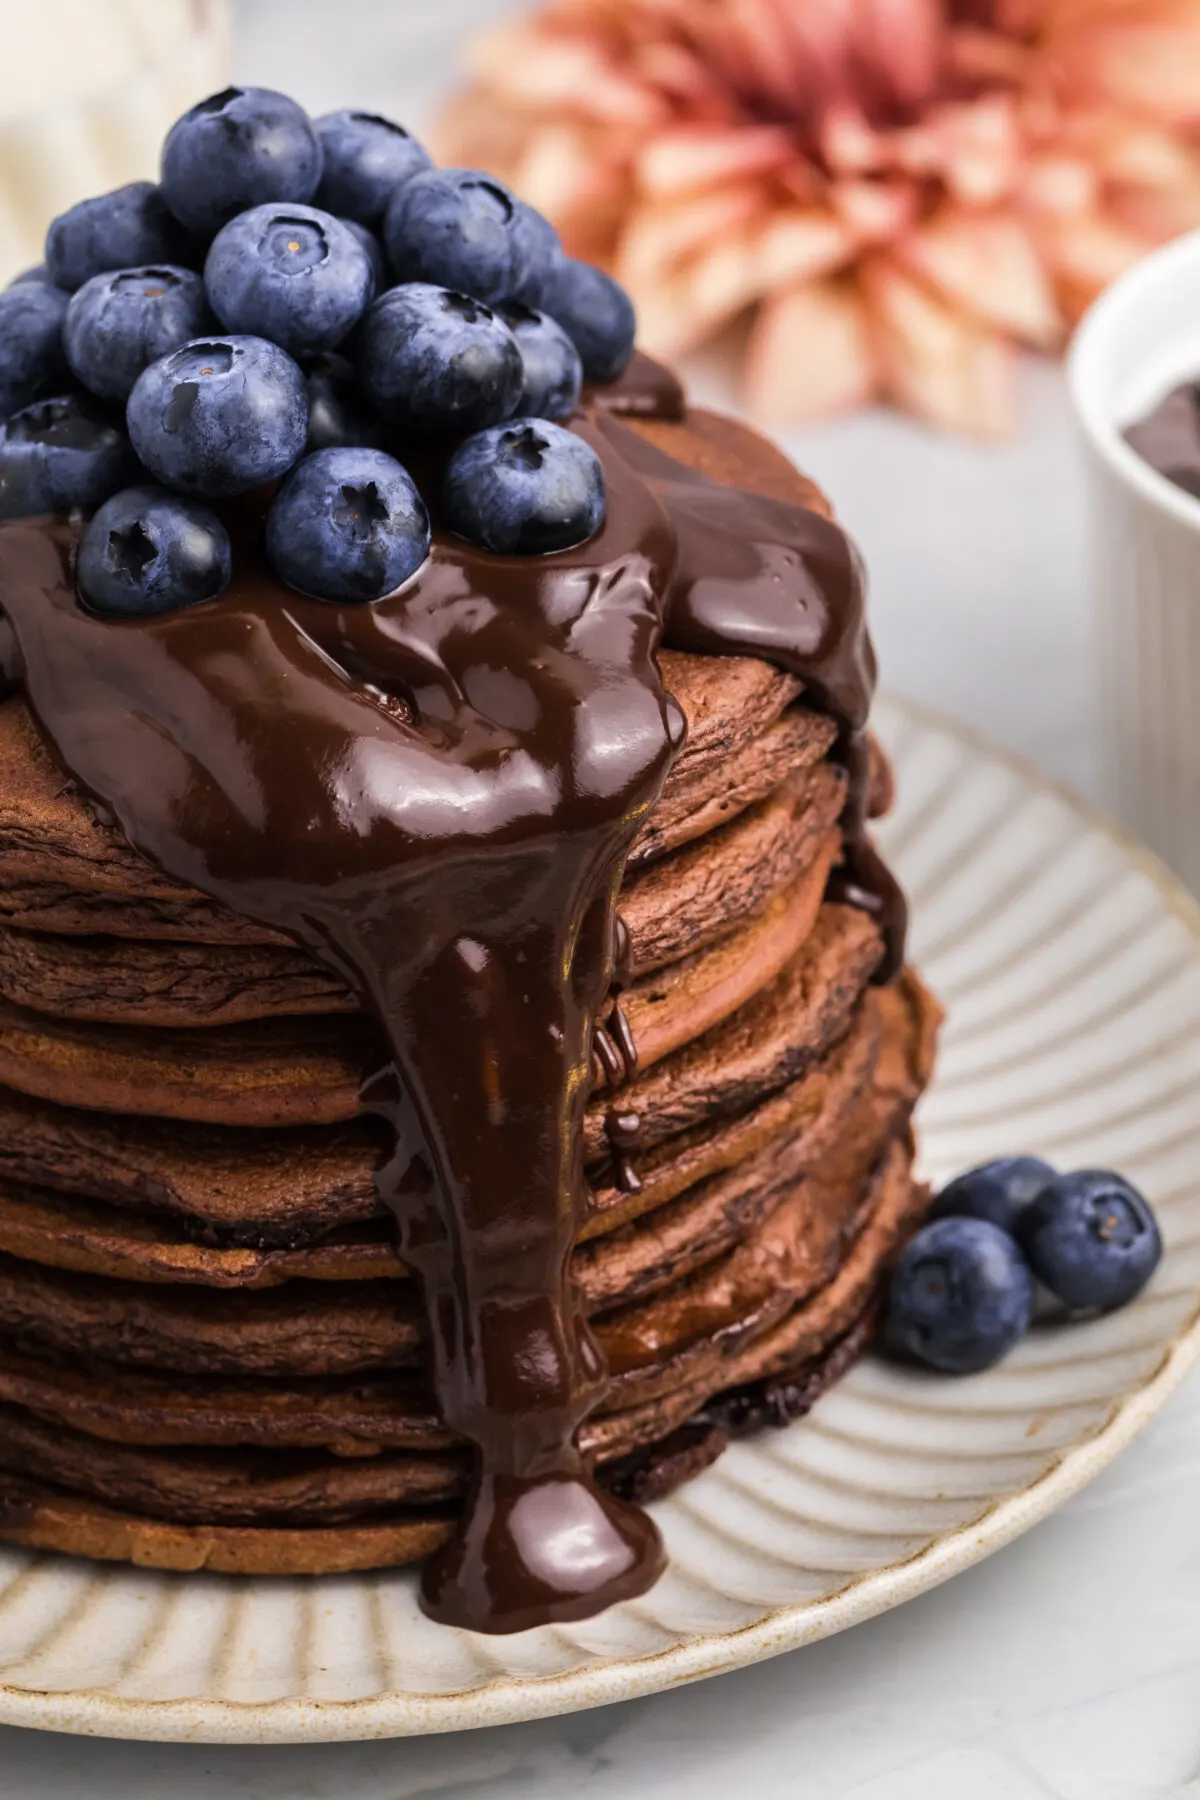 Indulge in the ultimate chocolate experience with our heavenly chocolate pancakes recipe. Light, fluffy, and brimming with chocolate!